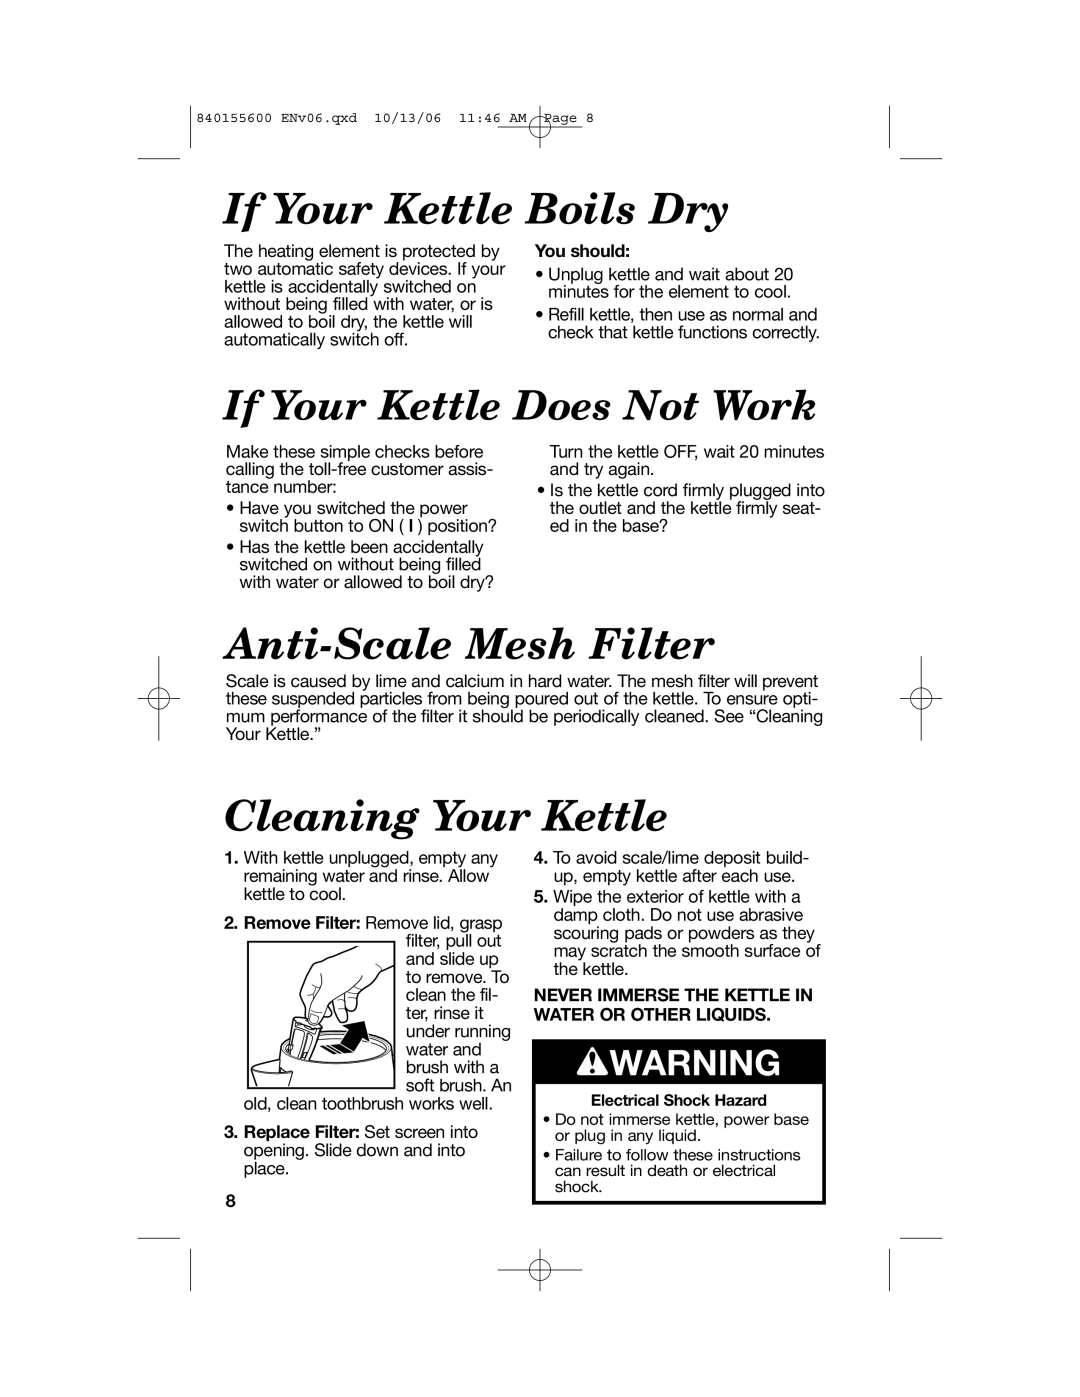 Hamilton Beach 40990 If Your Kettle Boils Dry, Anti-ScaleMesh Filter, Cleaning Your Kettle, If Your Kettle Does Not Work 